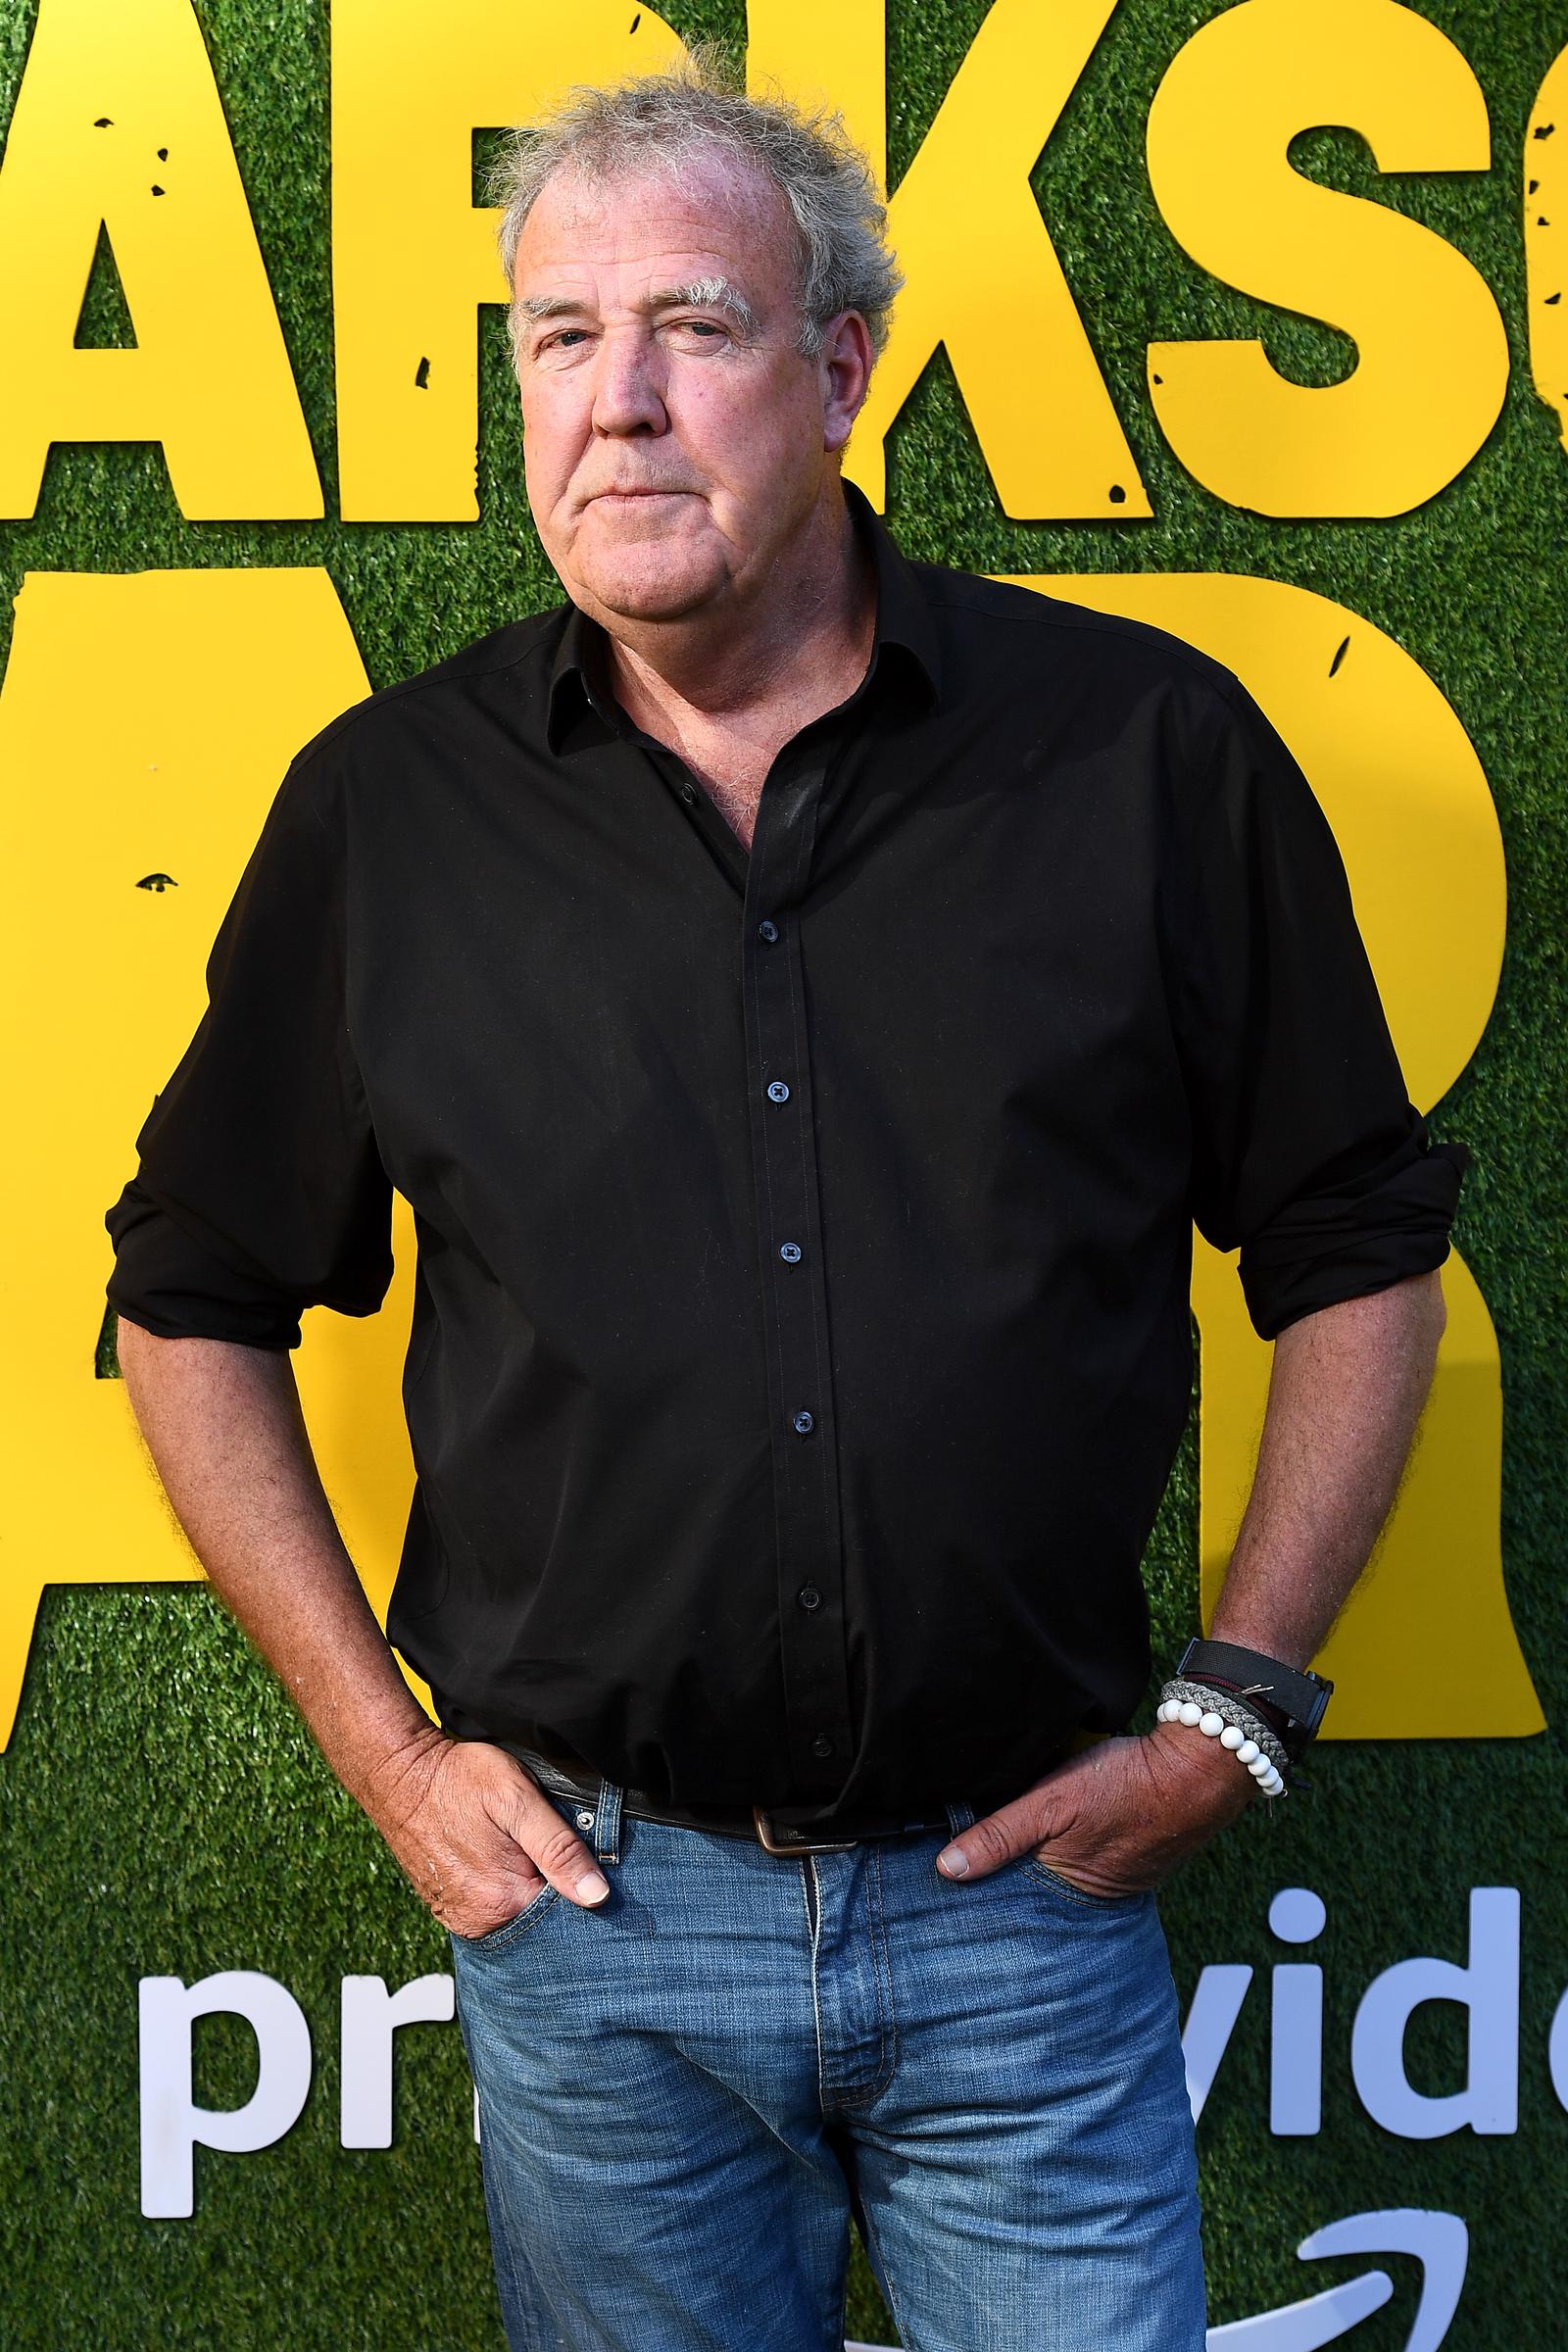 Jeremy Clarkson during the "Clarkson's Farm" photocall on June 9, 2021 in London, England | Source: Getty Images